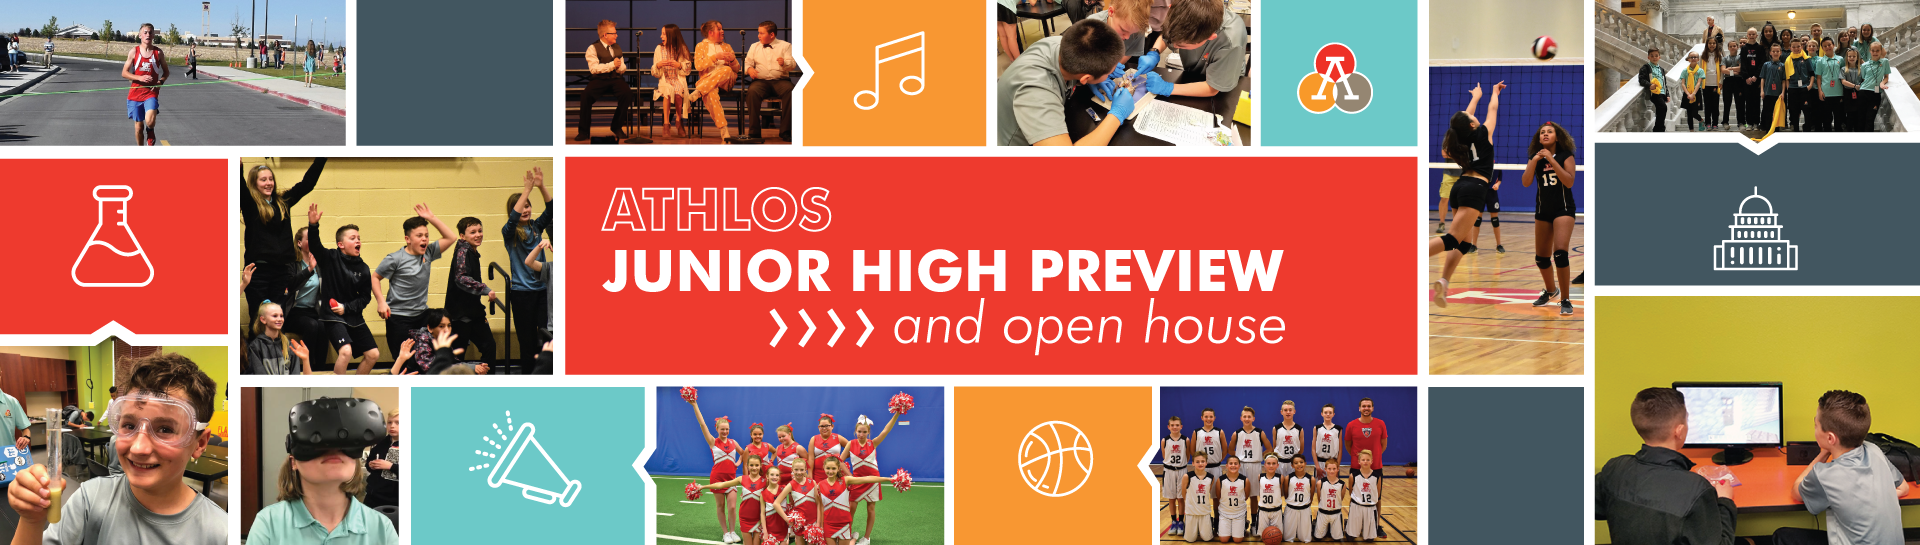 Athlos Junior High Preview and Open house